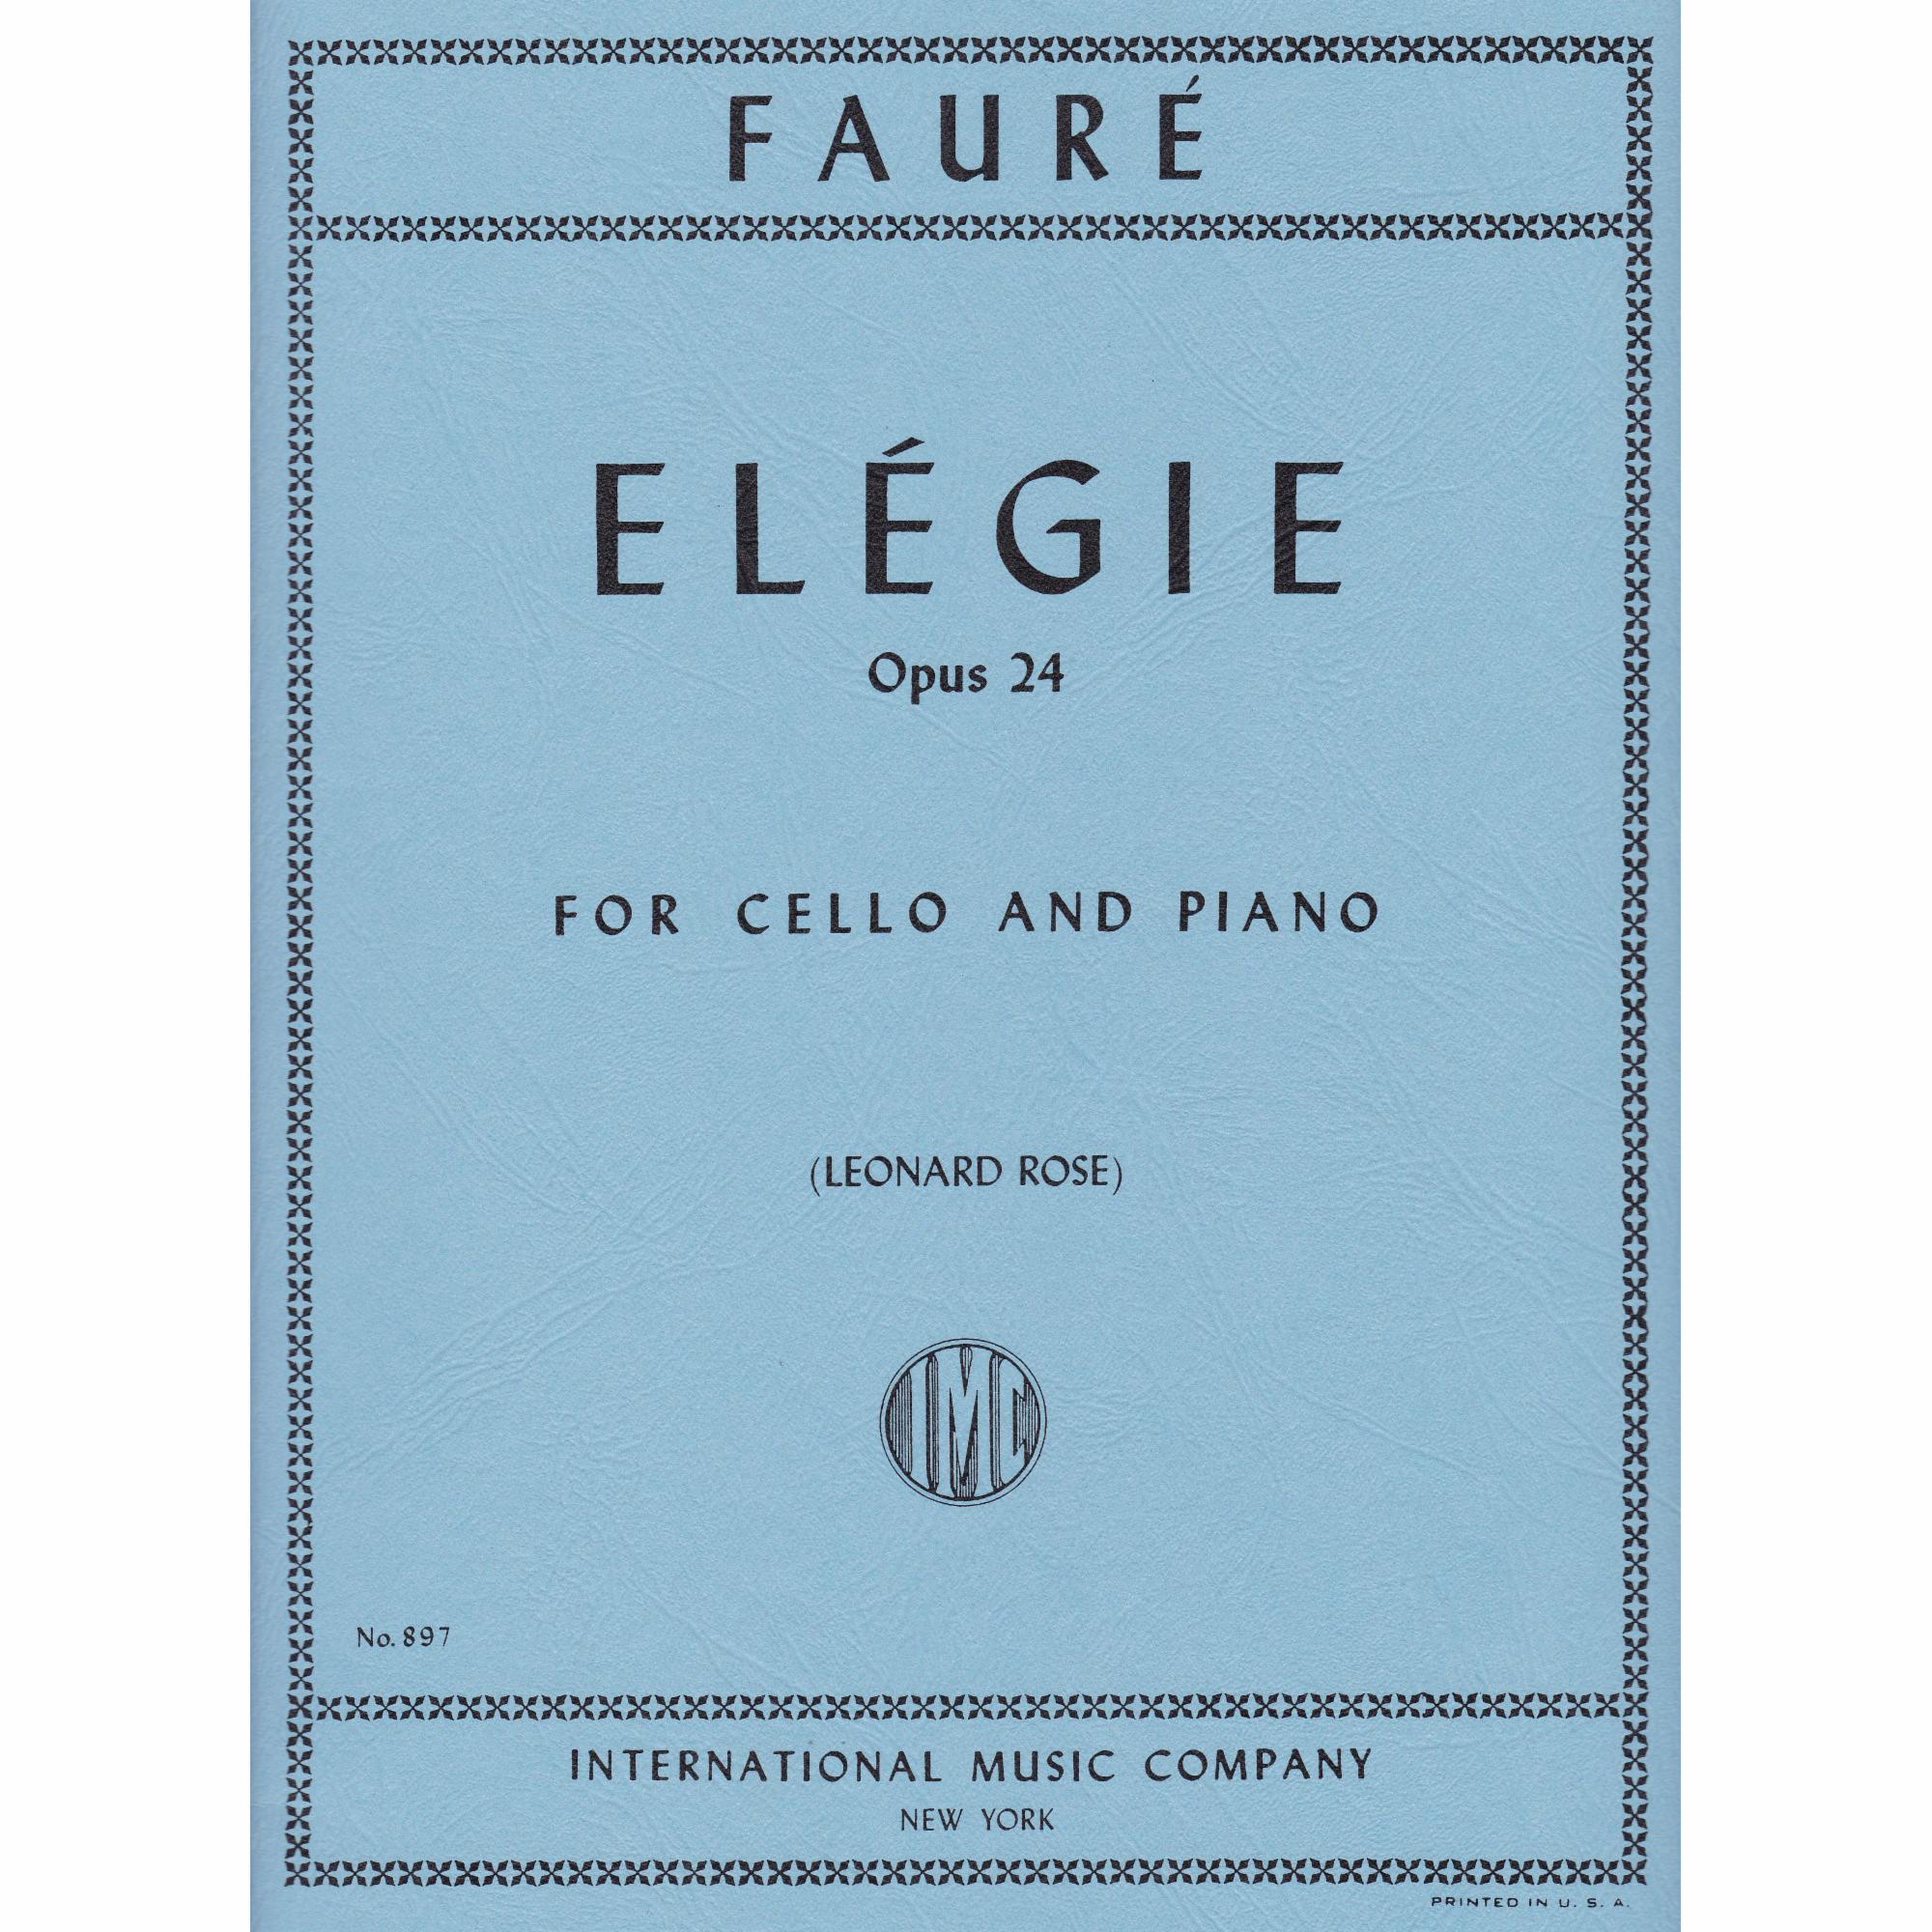 Elegy for Cello and Piano, Op. 24